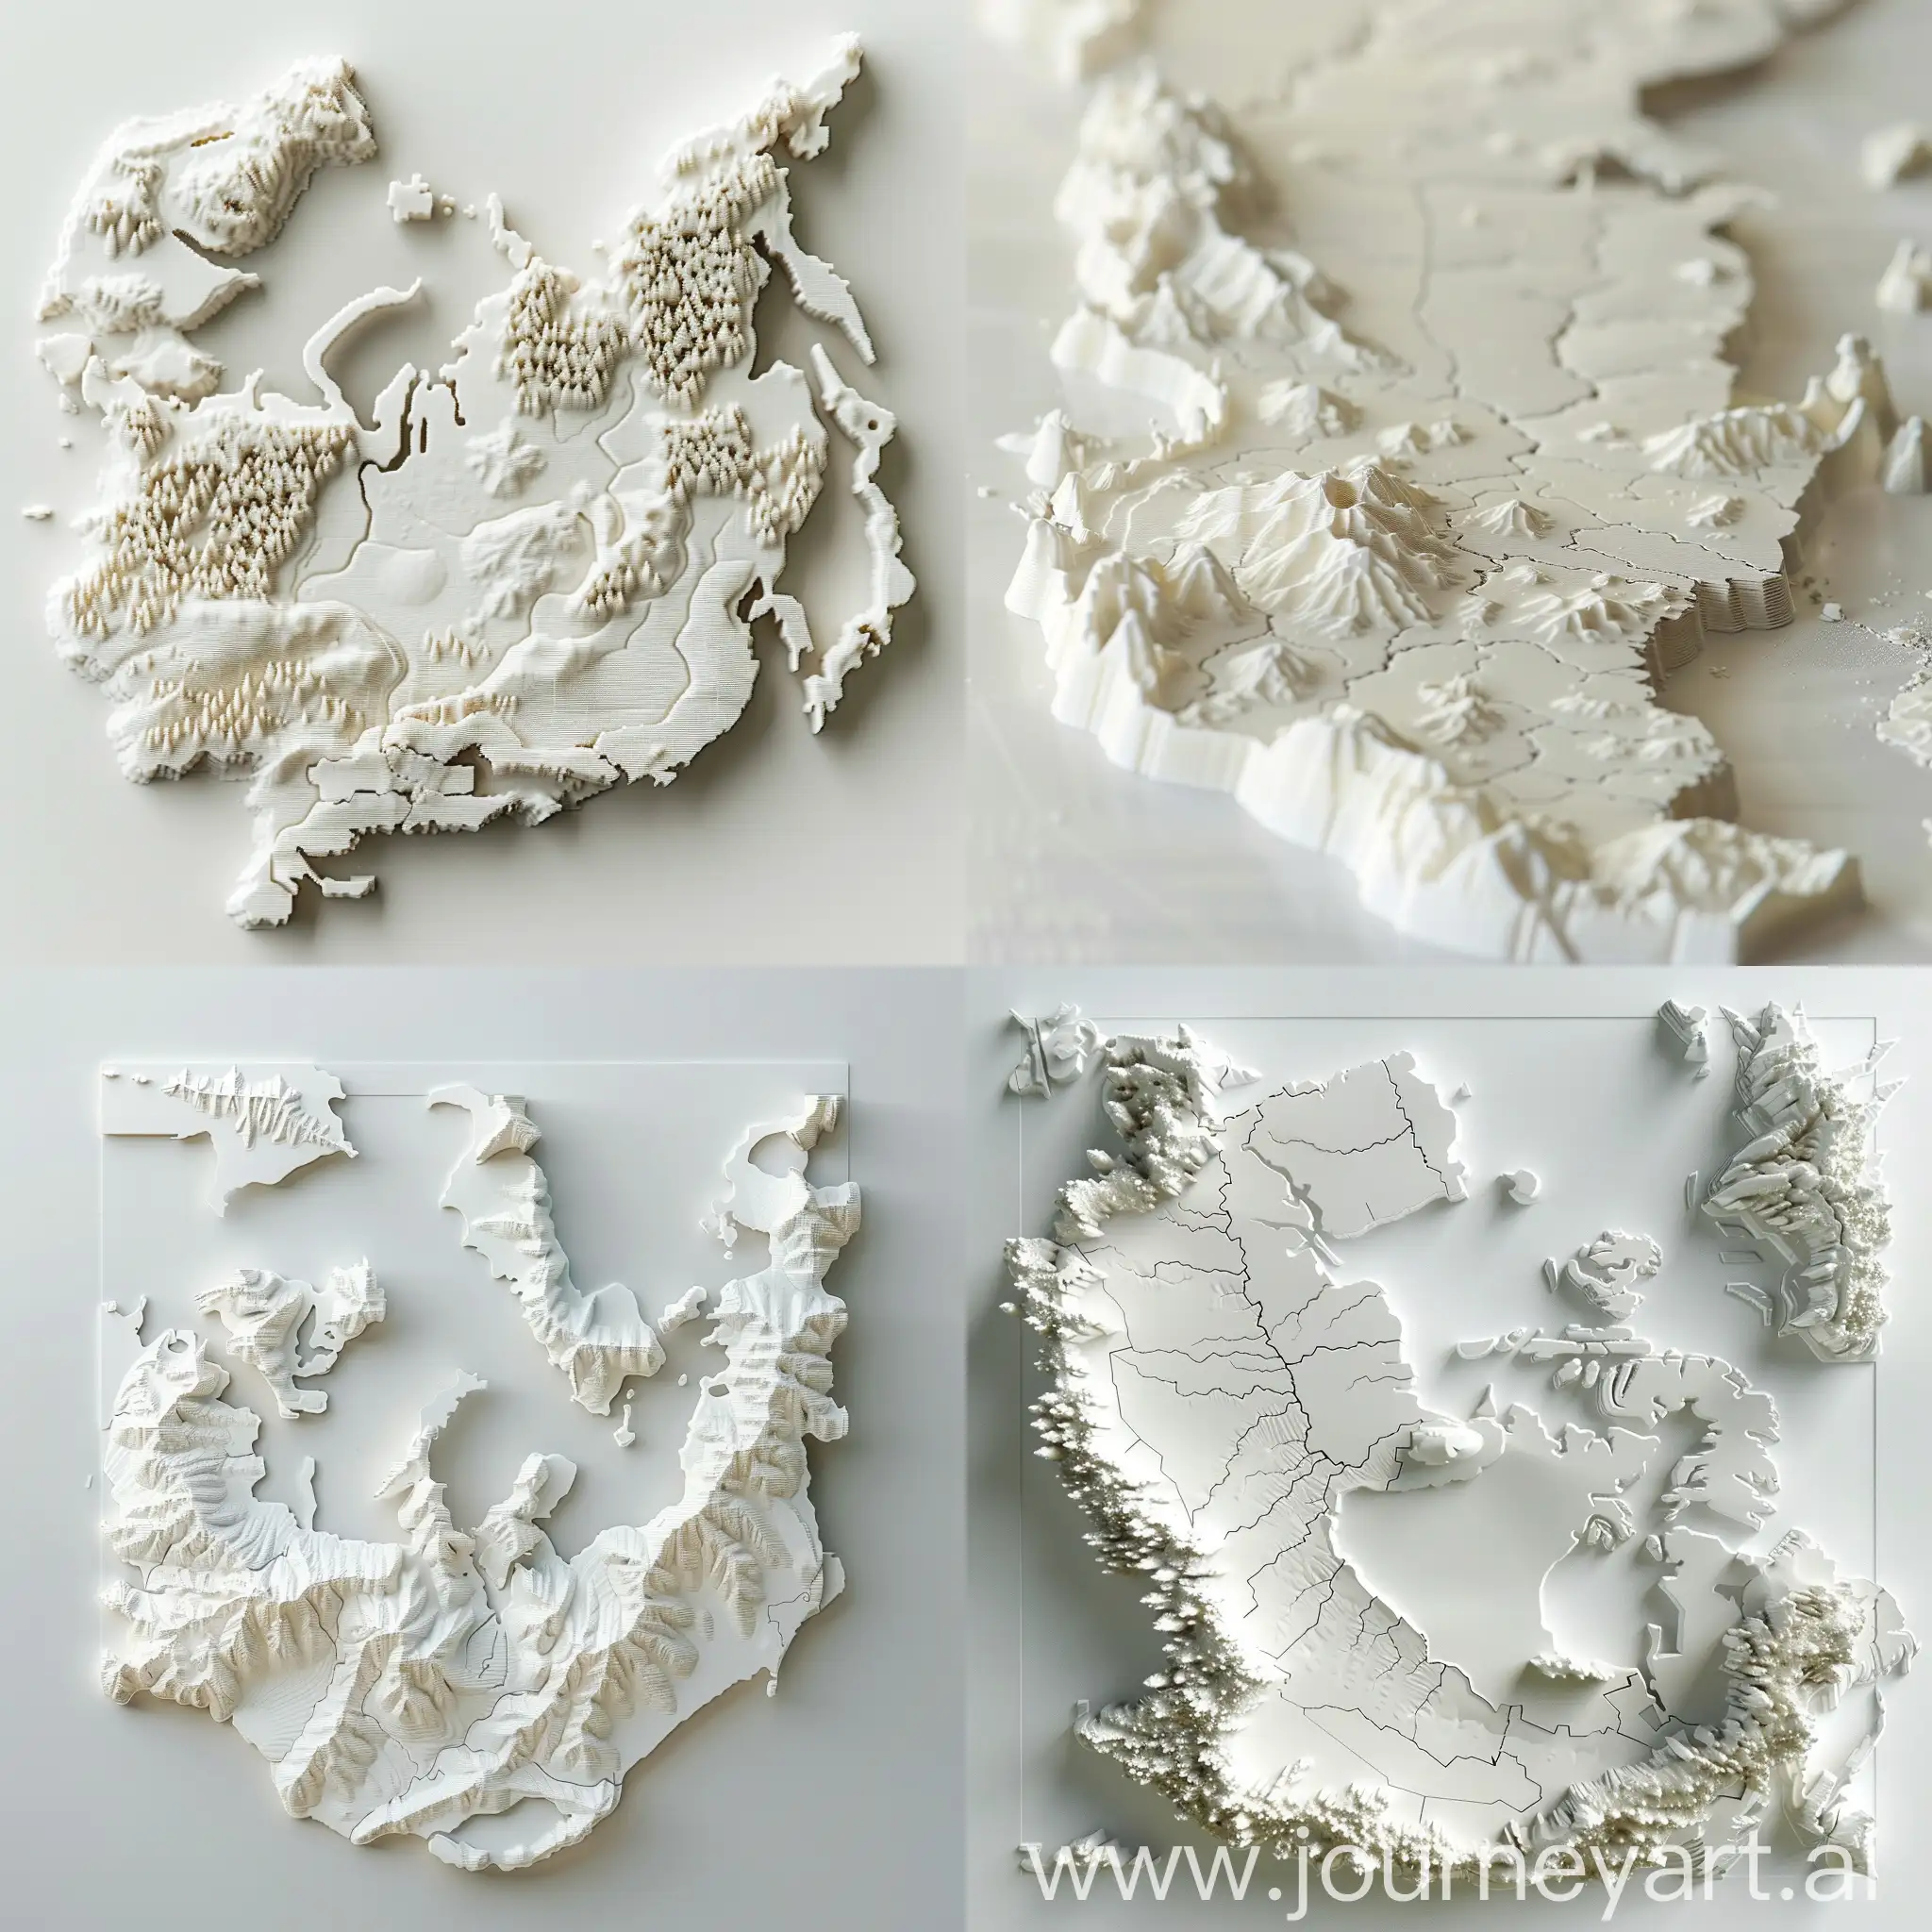 Minimalist-3D-Printed-Map-of-Russia-Abstract-Top-View-Art